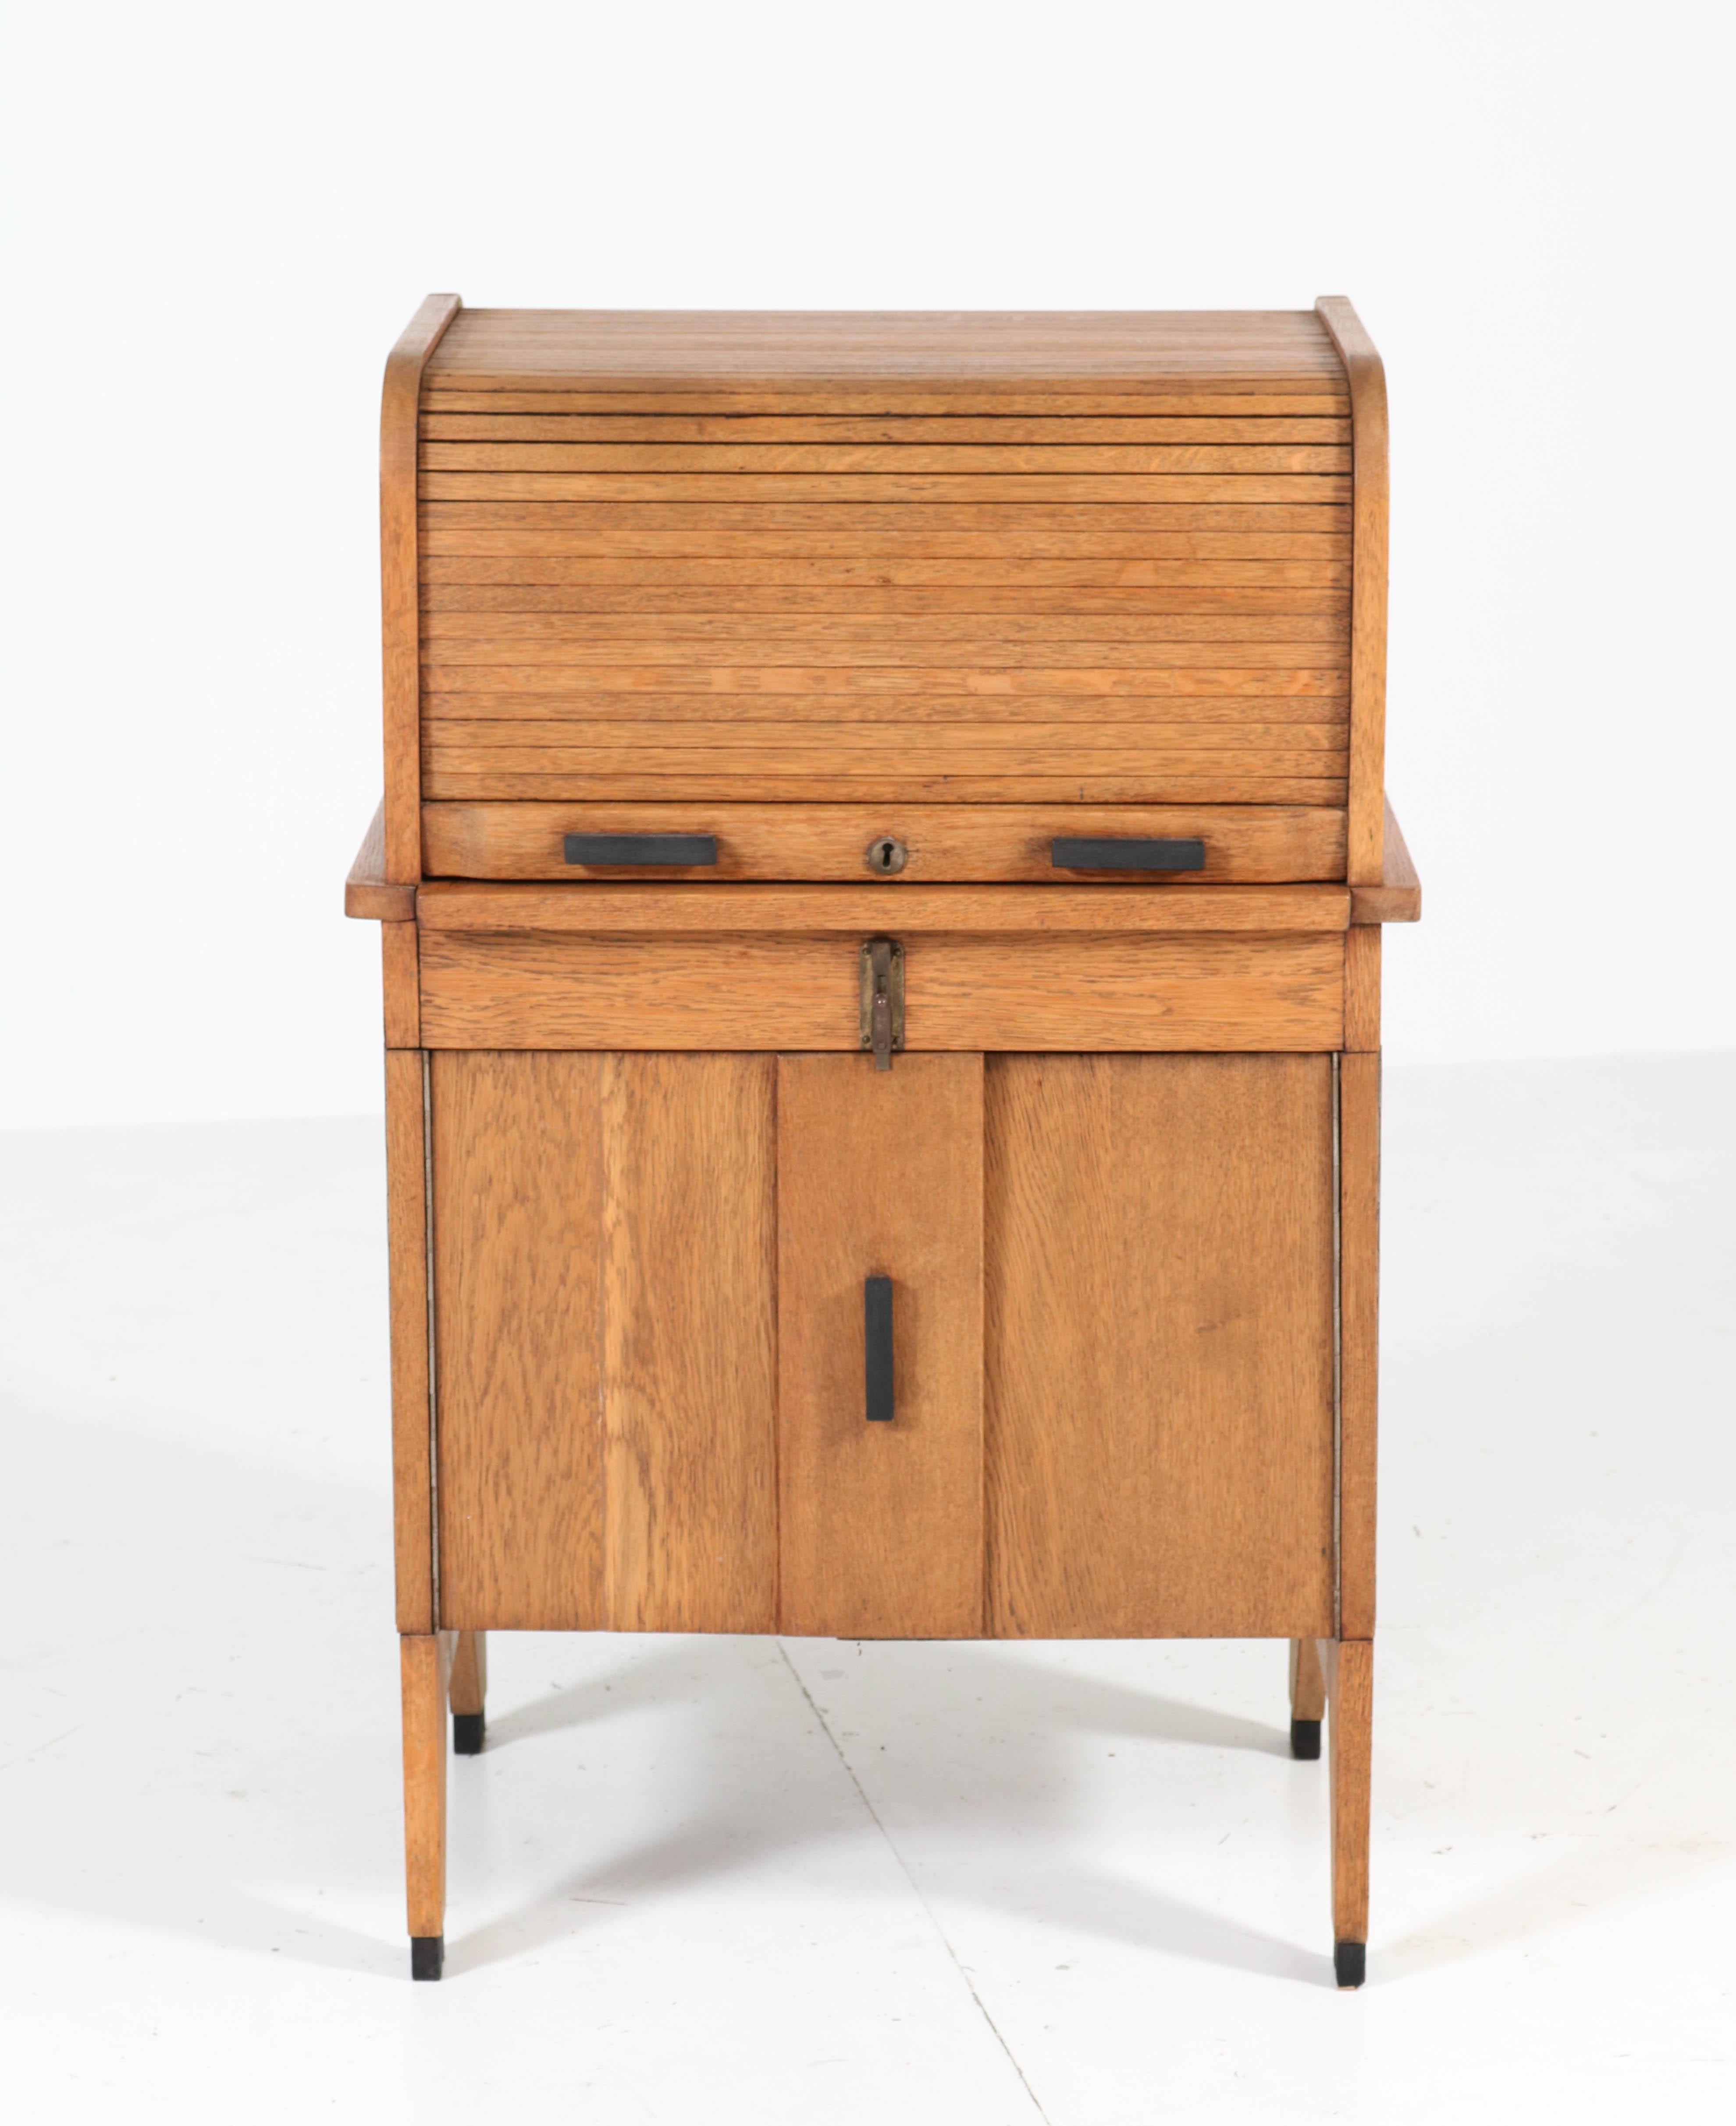 Rare and hard to find Art Deco Haagse School roll top desk.
Solid oak with ebonized handles.
Striking Dutch design from the 1920s.
By pulling down the roll top at the back, this stunning piece of furniture transforms in a pedestal desk!
Width of